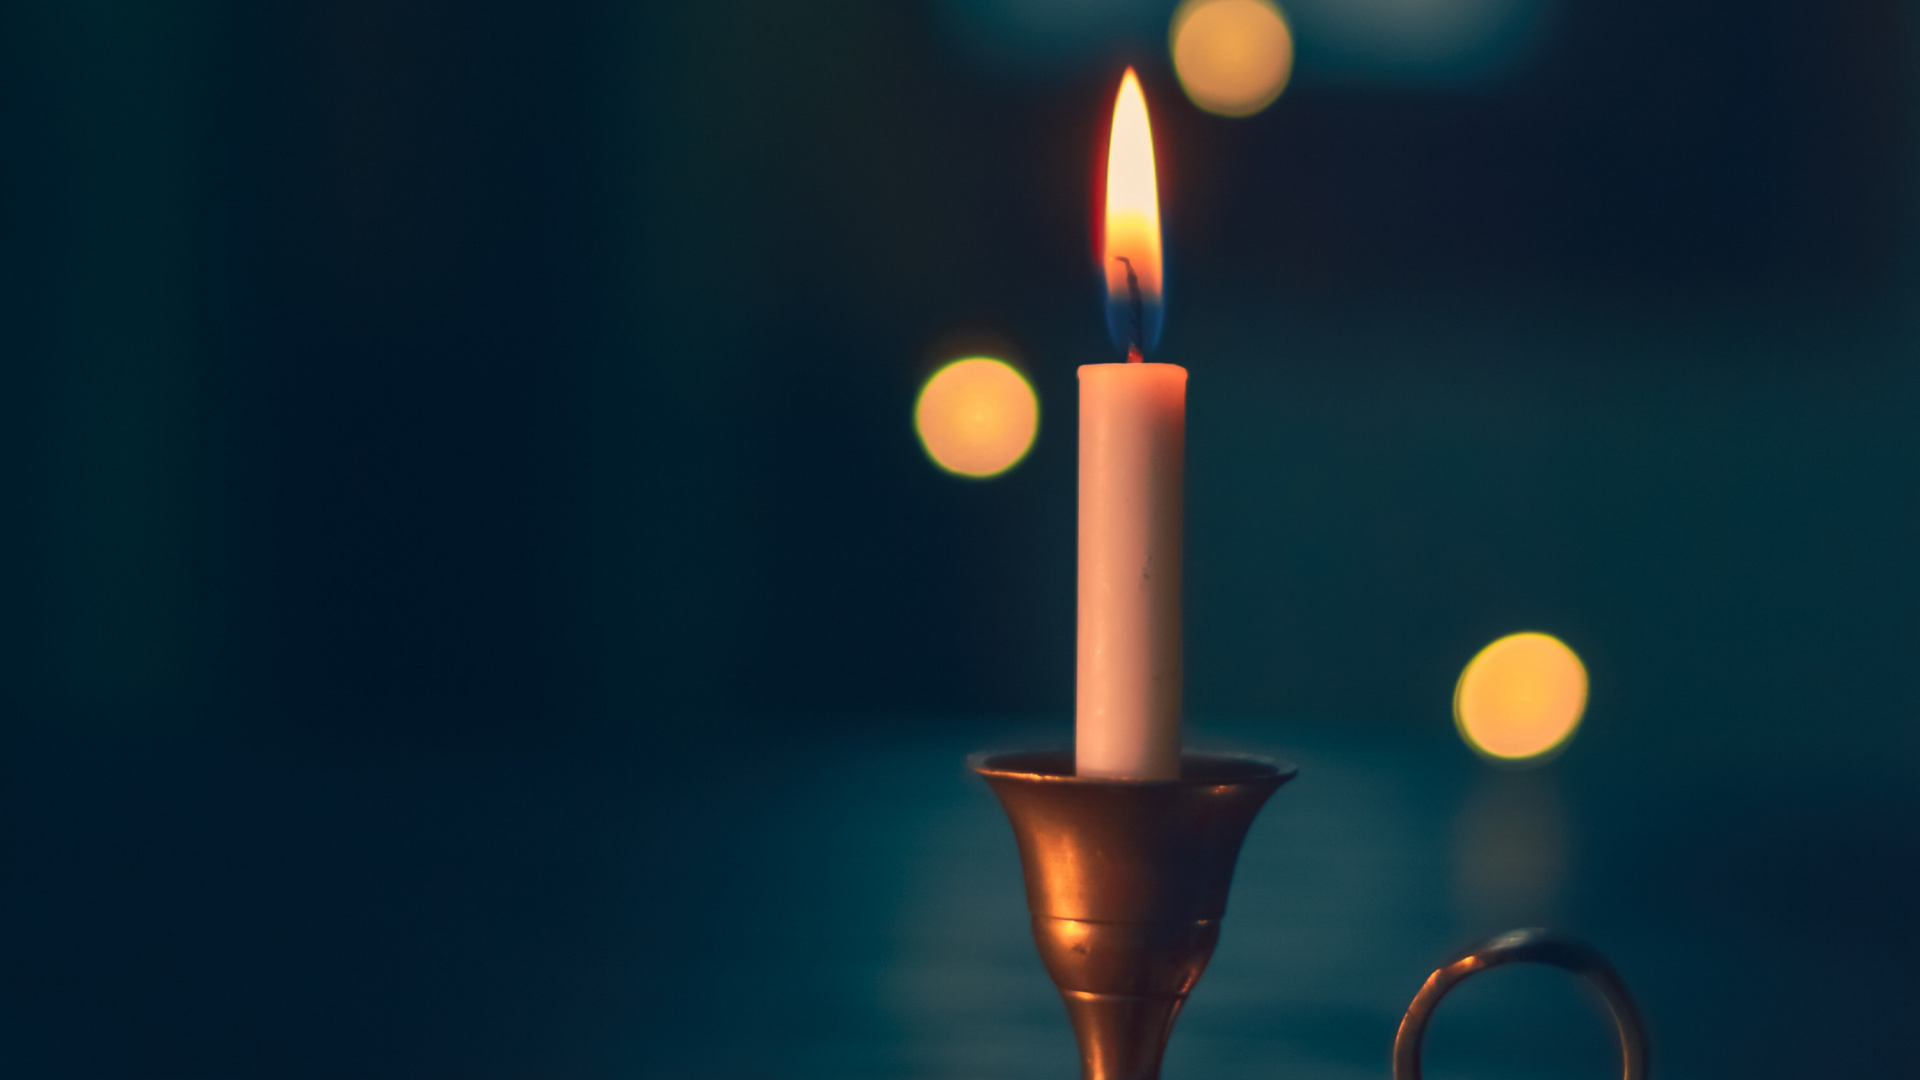 Lighted Candle in Black Holder. Wallpaper in 1920x1080 Resolution